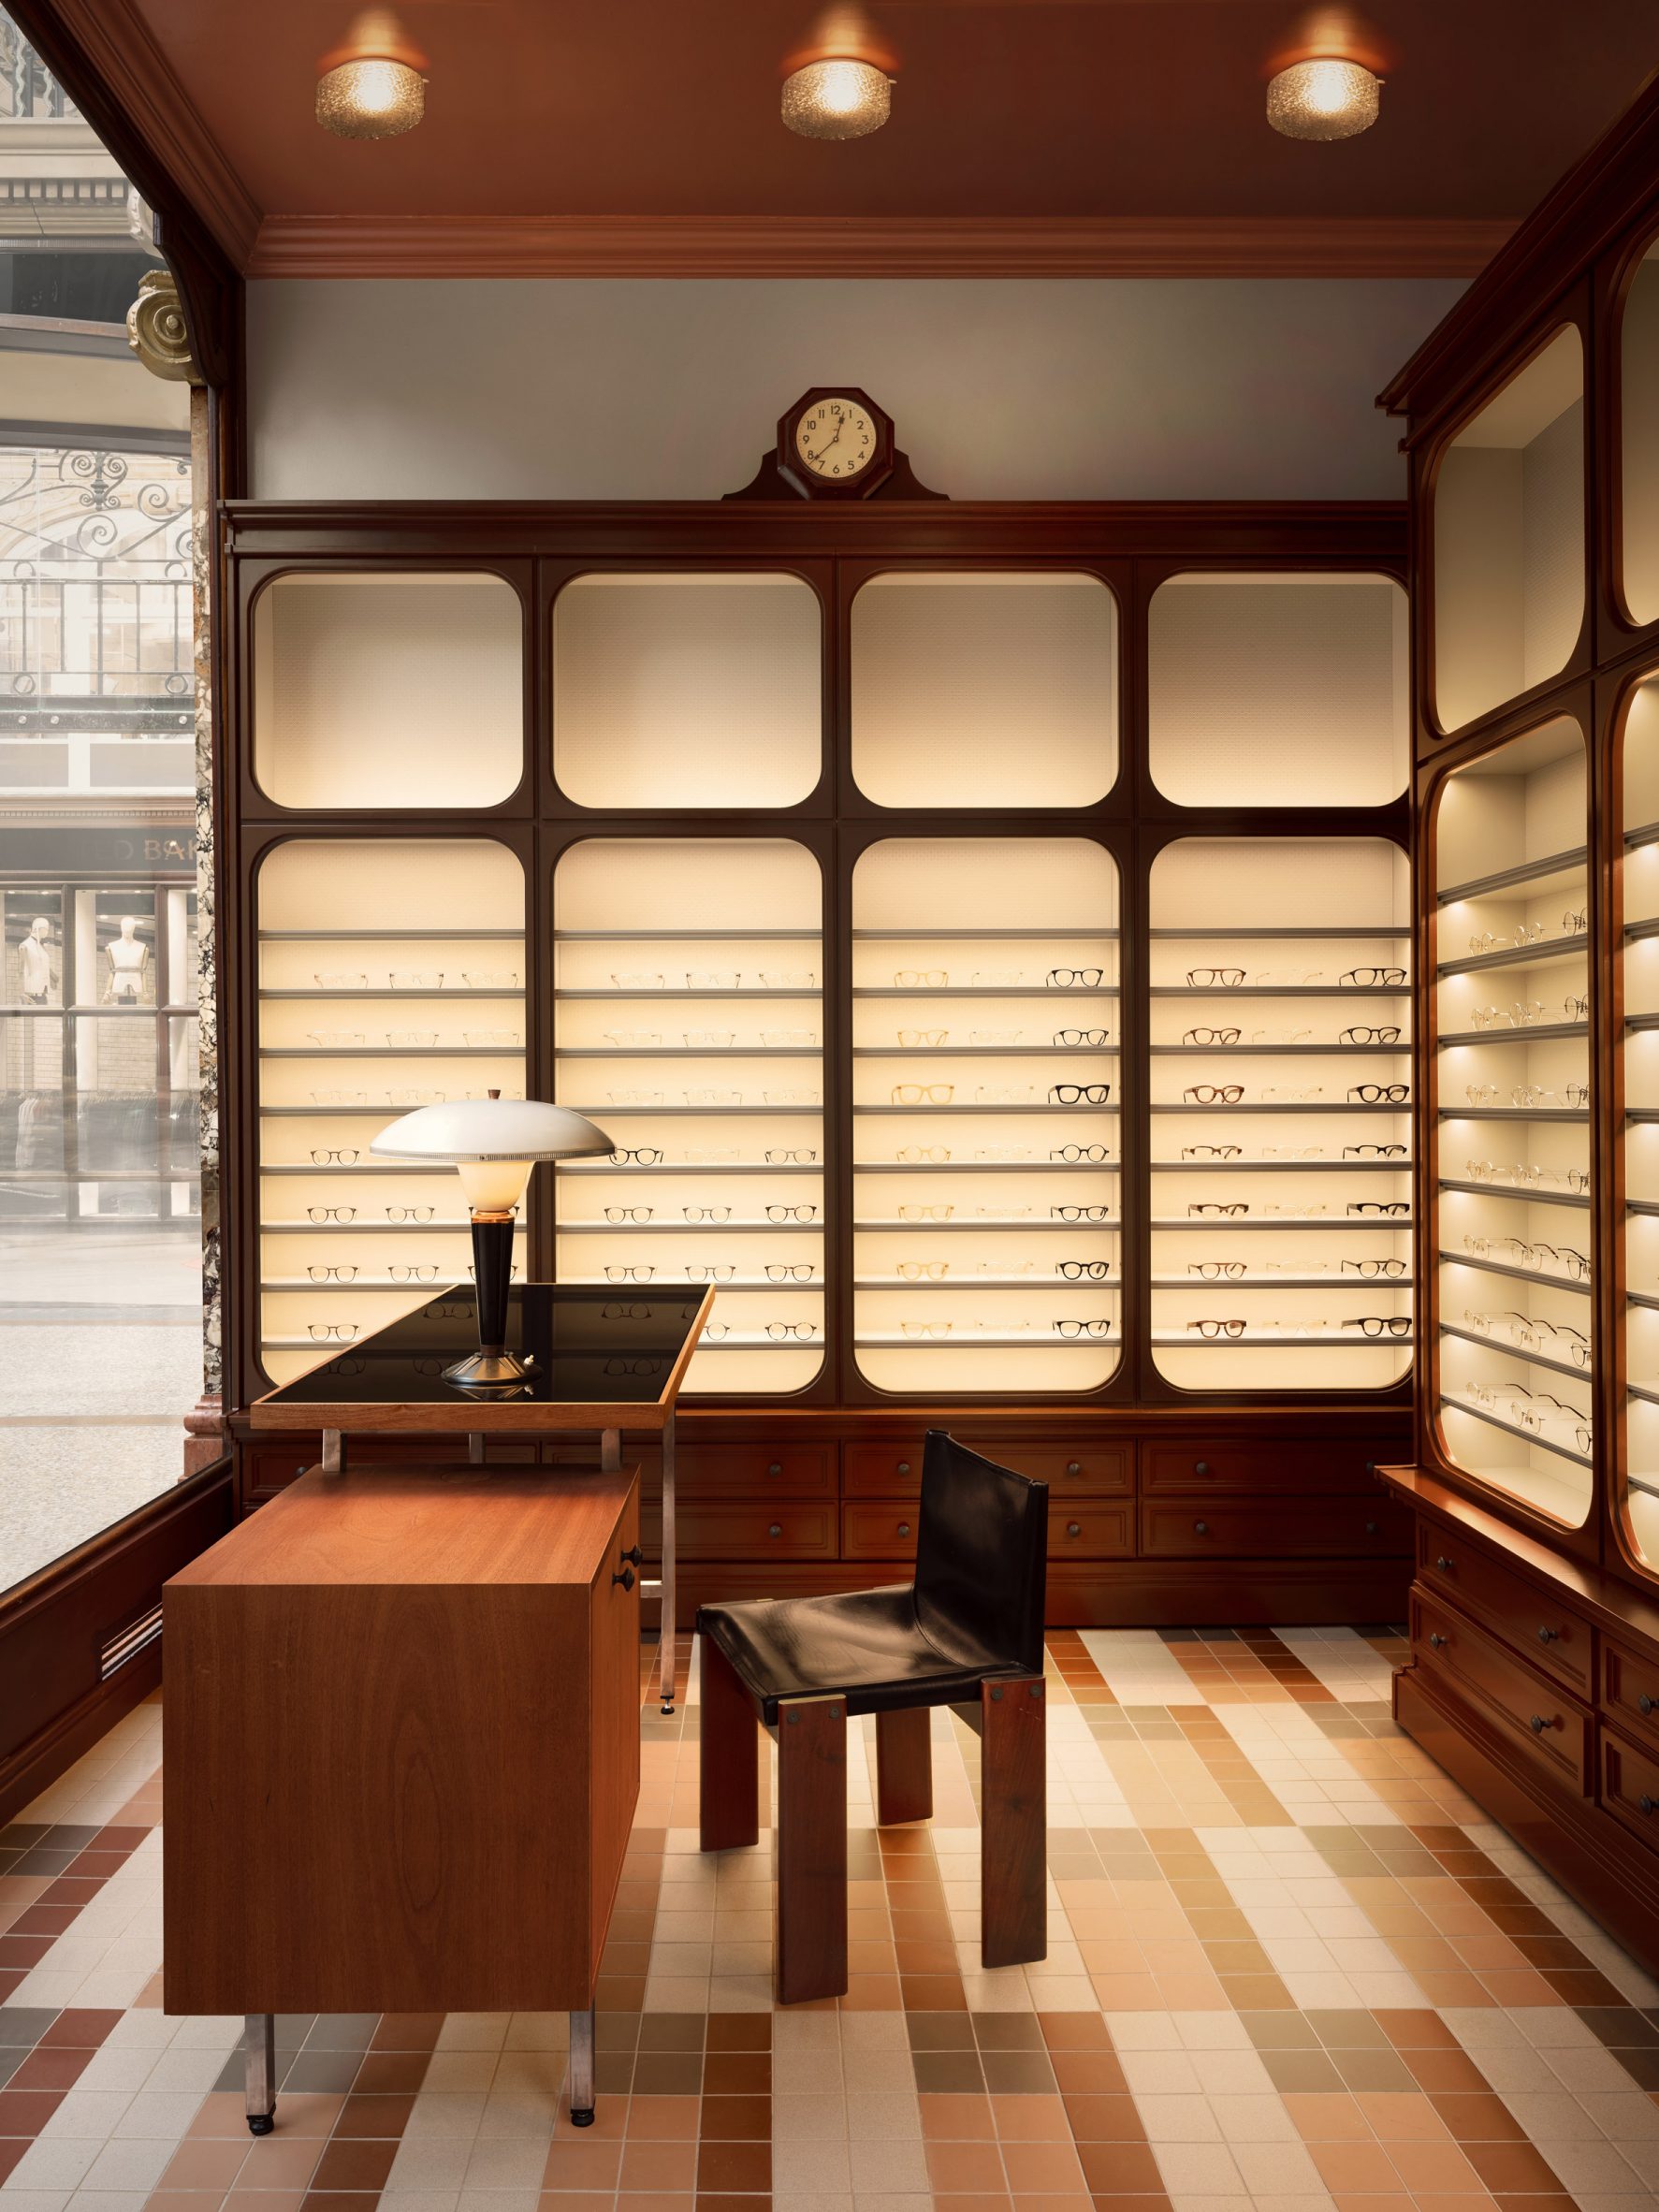 Leeds eyewear store by Child Studio with mosaik tile floor and wooden cabinetry